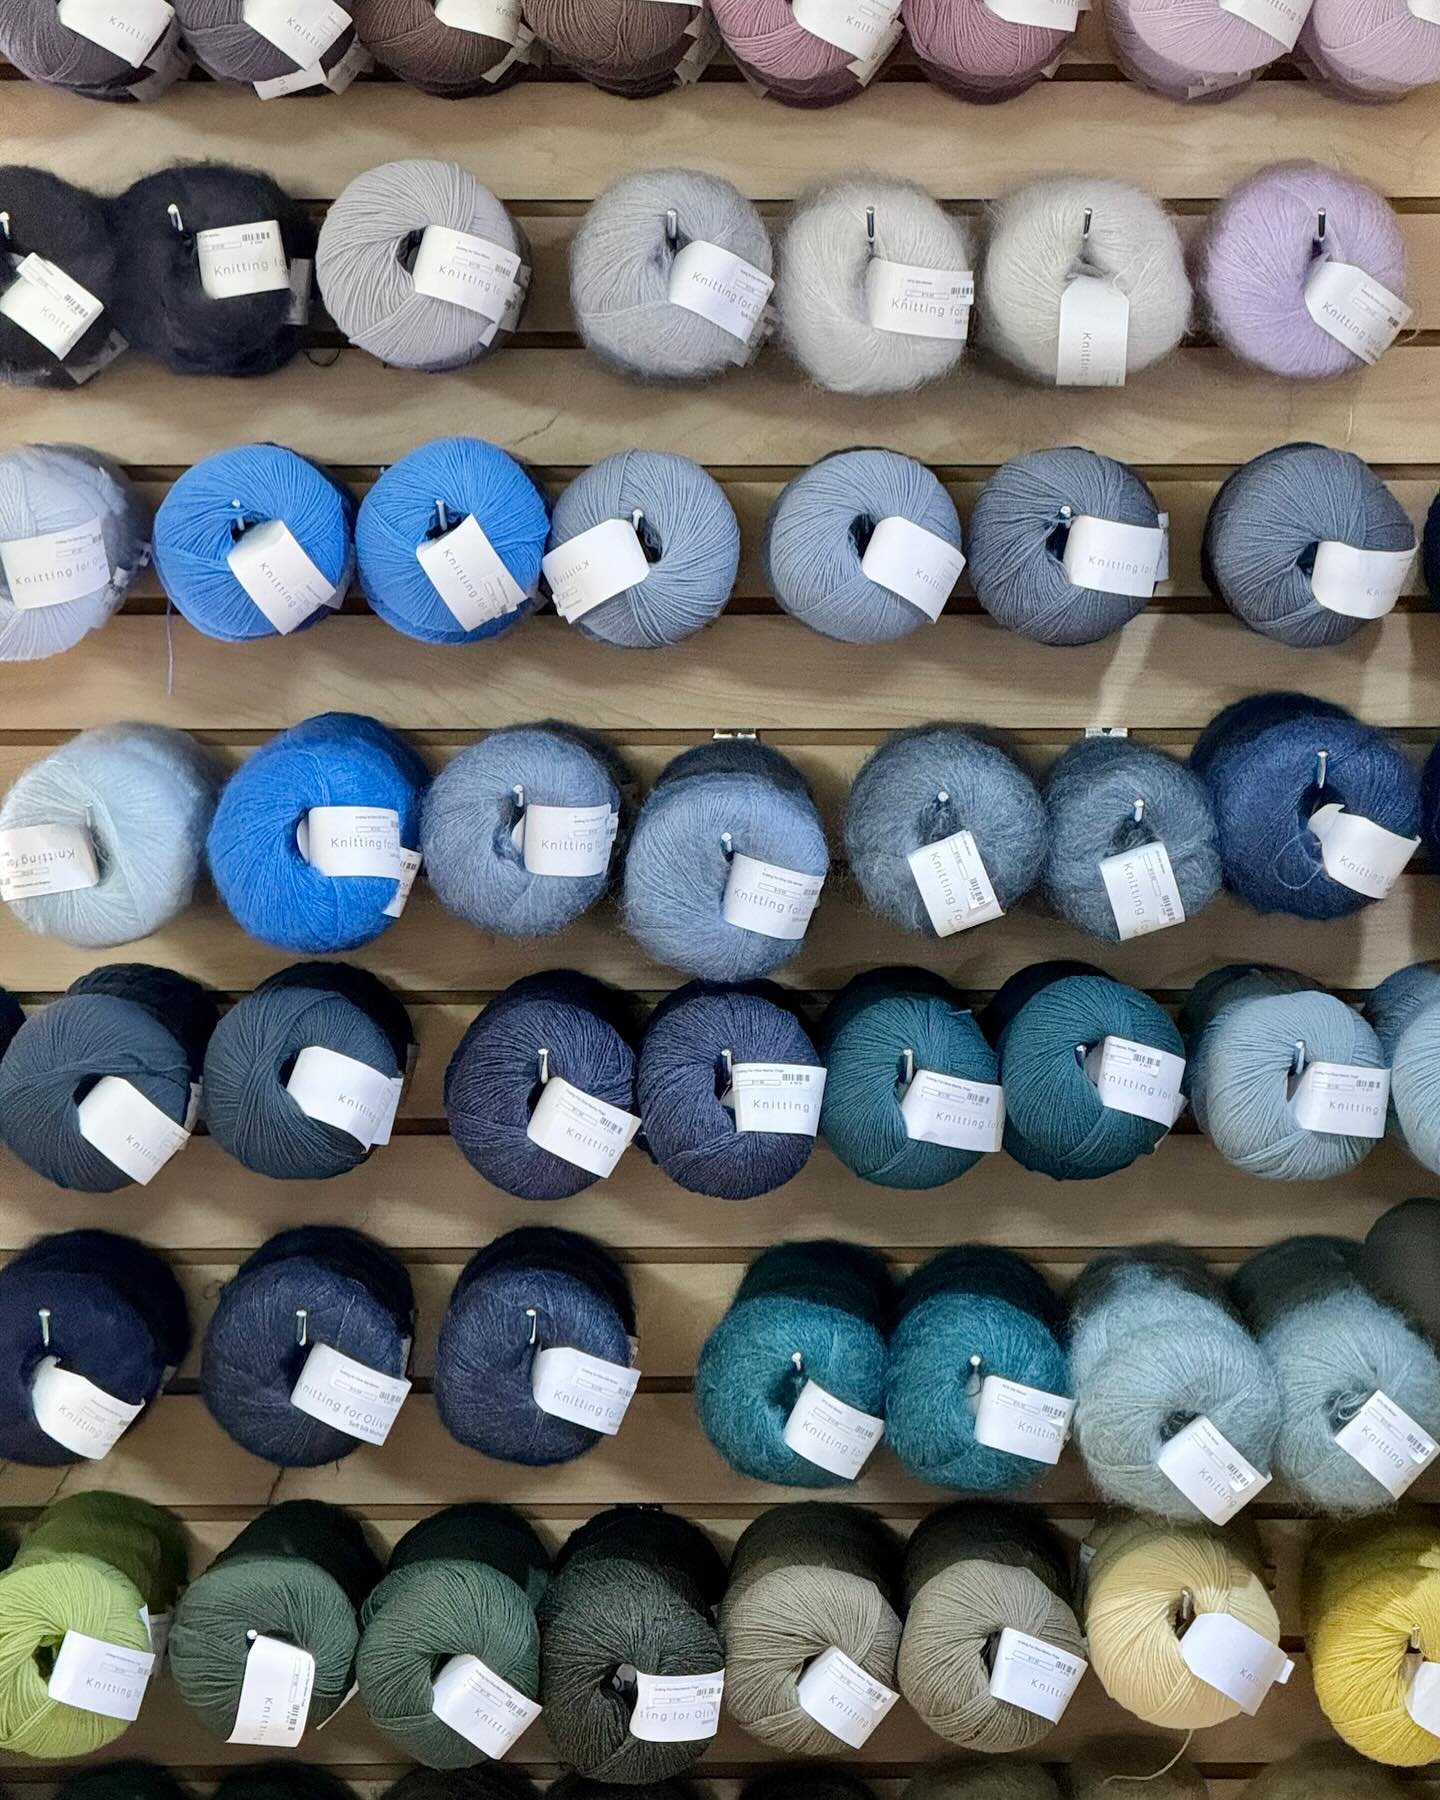 @mitchelltiina and @dianakeairnes built this bewpwall of yarn. Big restock from @knittingforolive  Wool, cotton merino, silk and silk/mohair. #knit #knitting  #knittersoftheworld  #knitters #doers #makers #craft #create #lys #fortcollins #wool #cotto